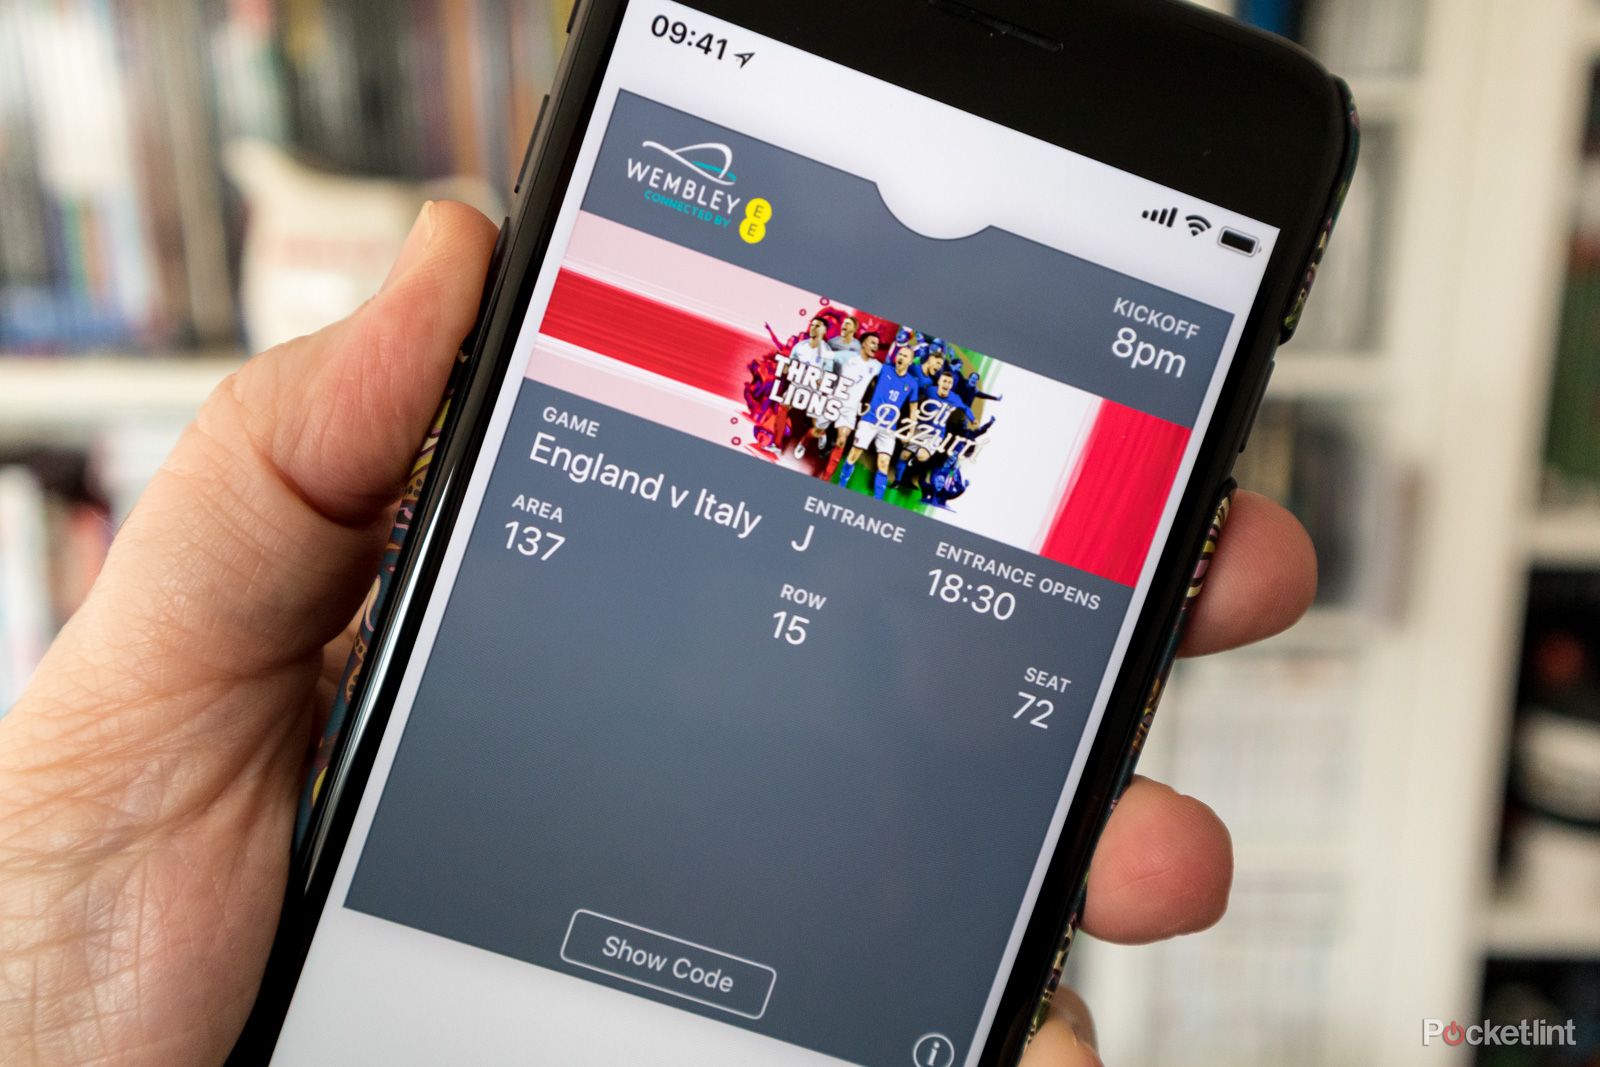 Wembley Stadium now offers contactless ticketing through Wallet for Apple Watch and iPhone image 1